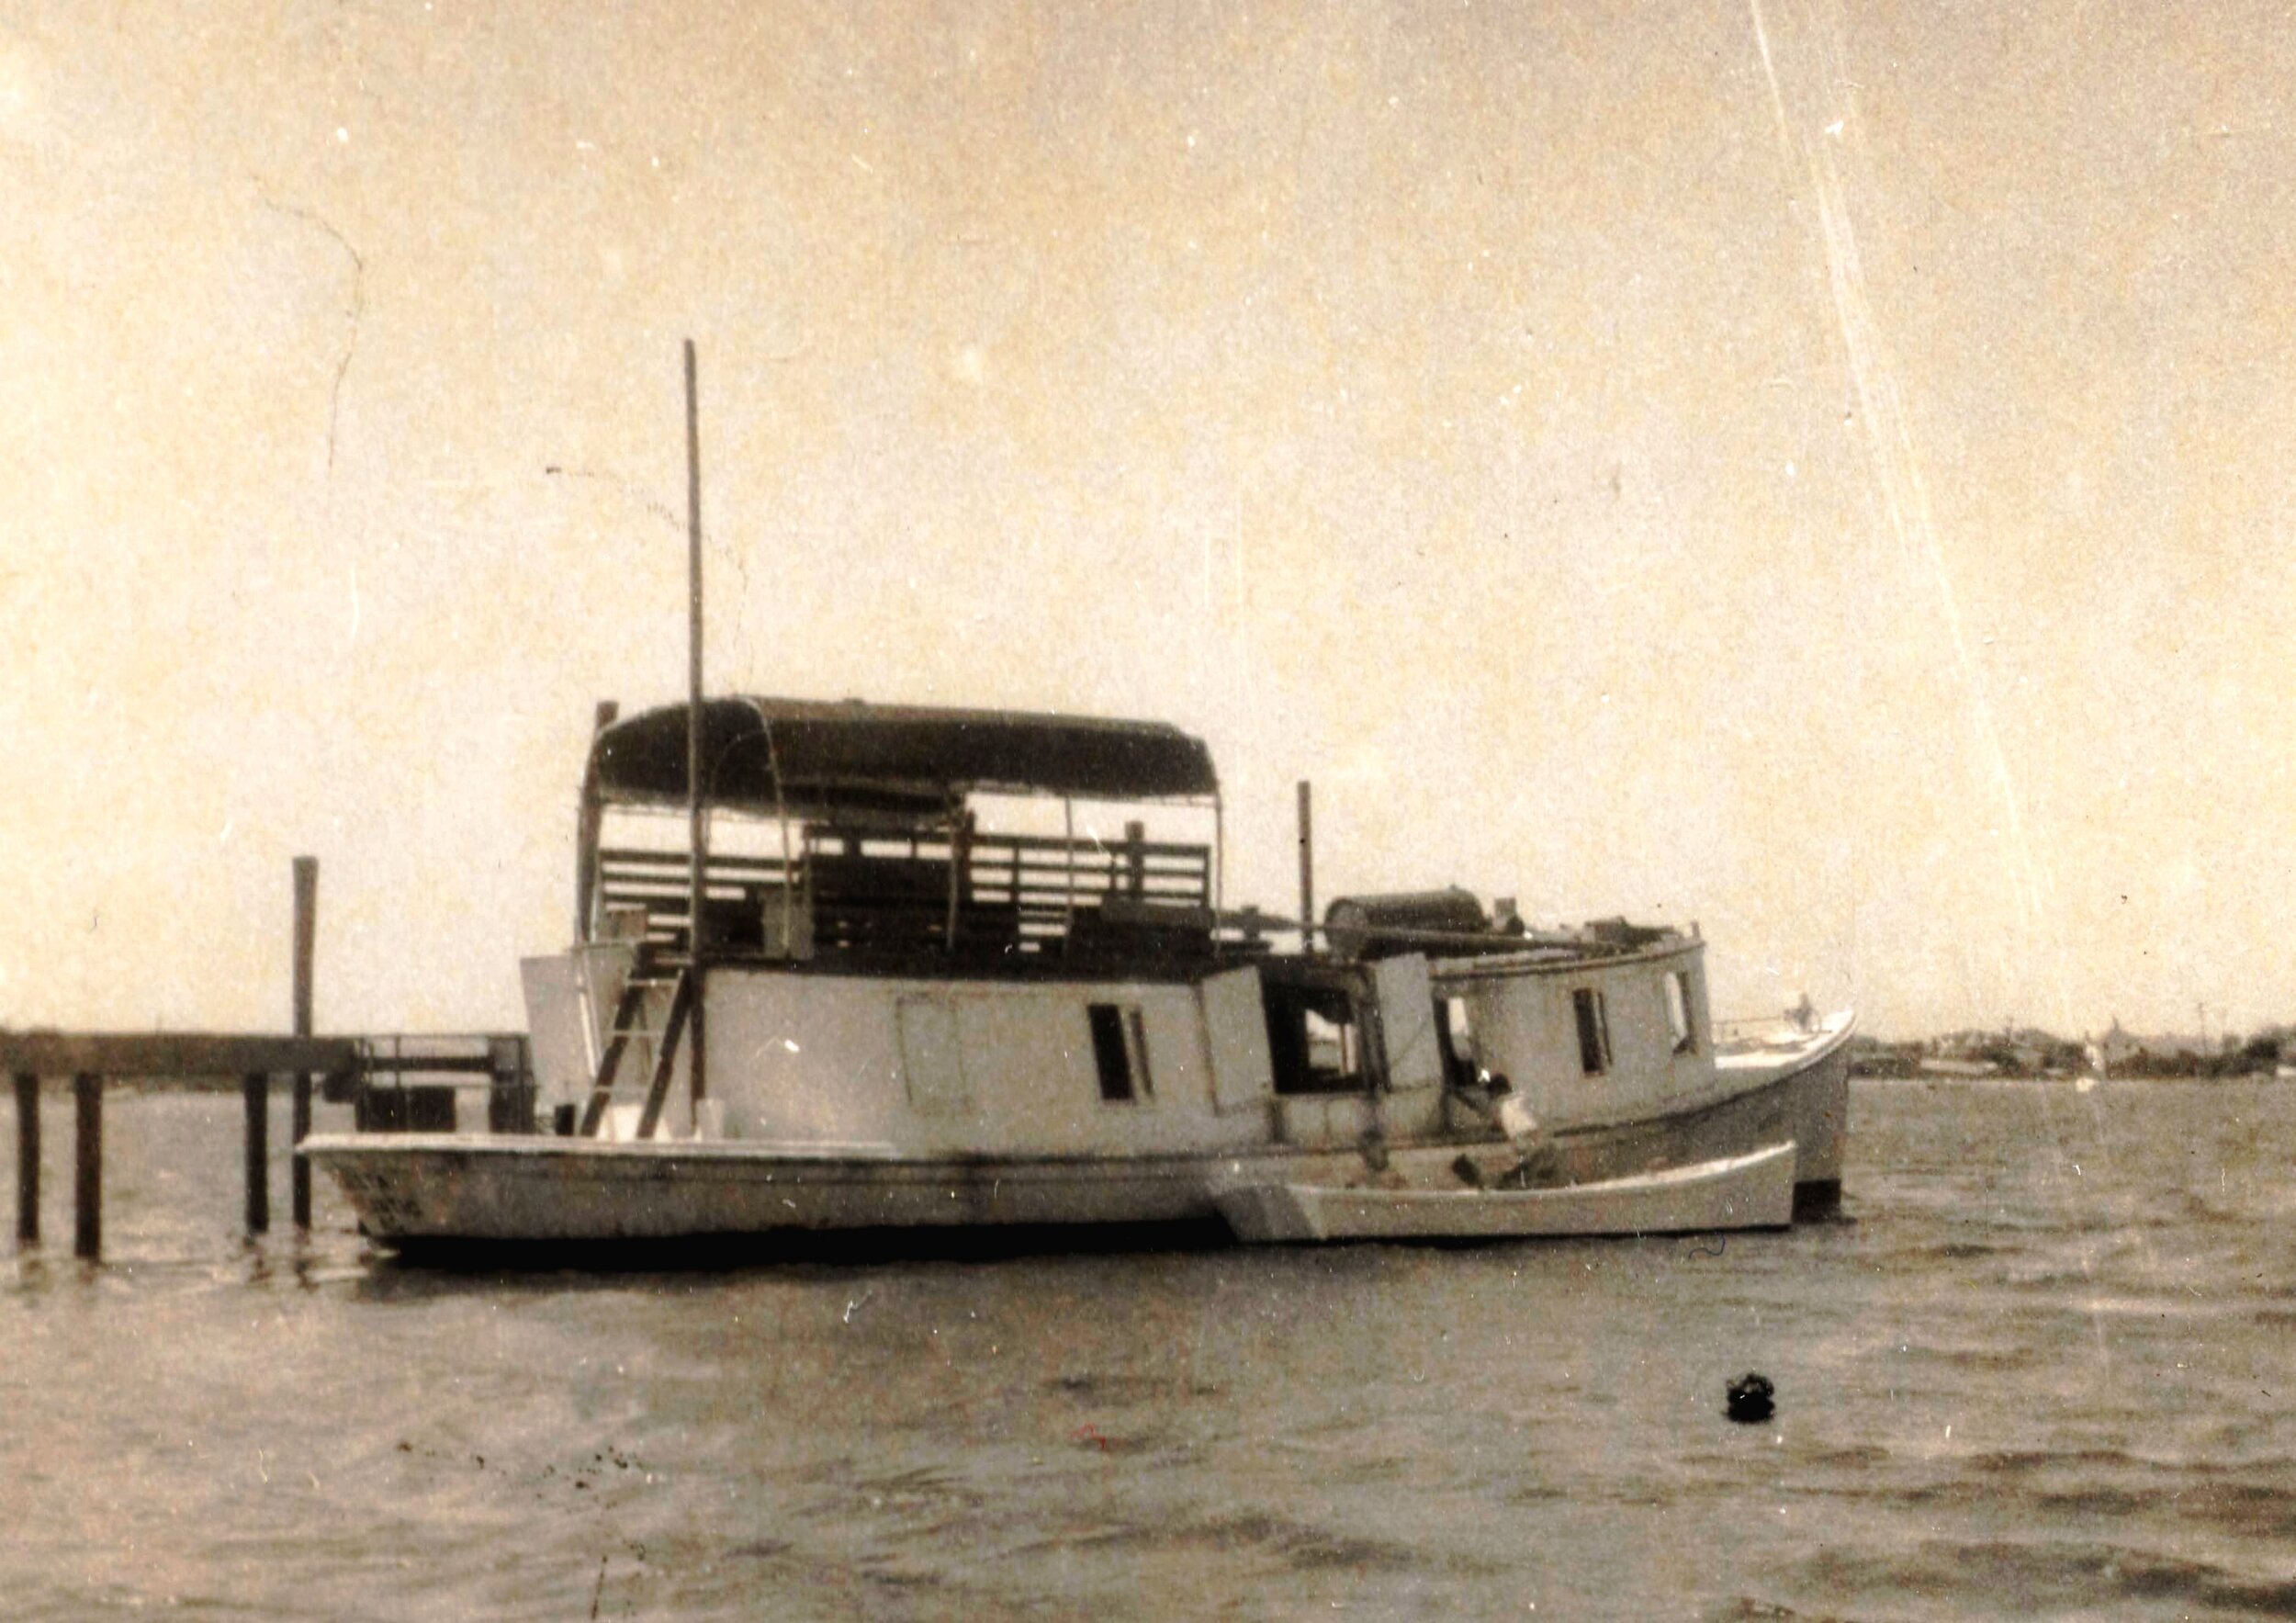 6f Mailboat Aleta 1 - croppedbrightened - CSWM collection.jpg